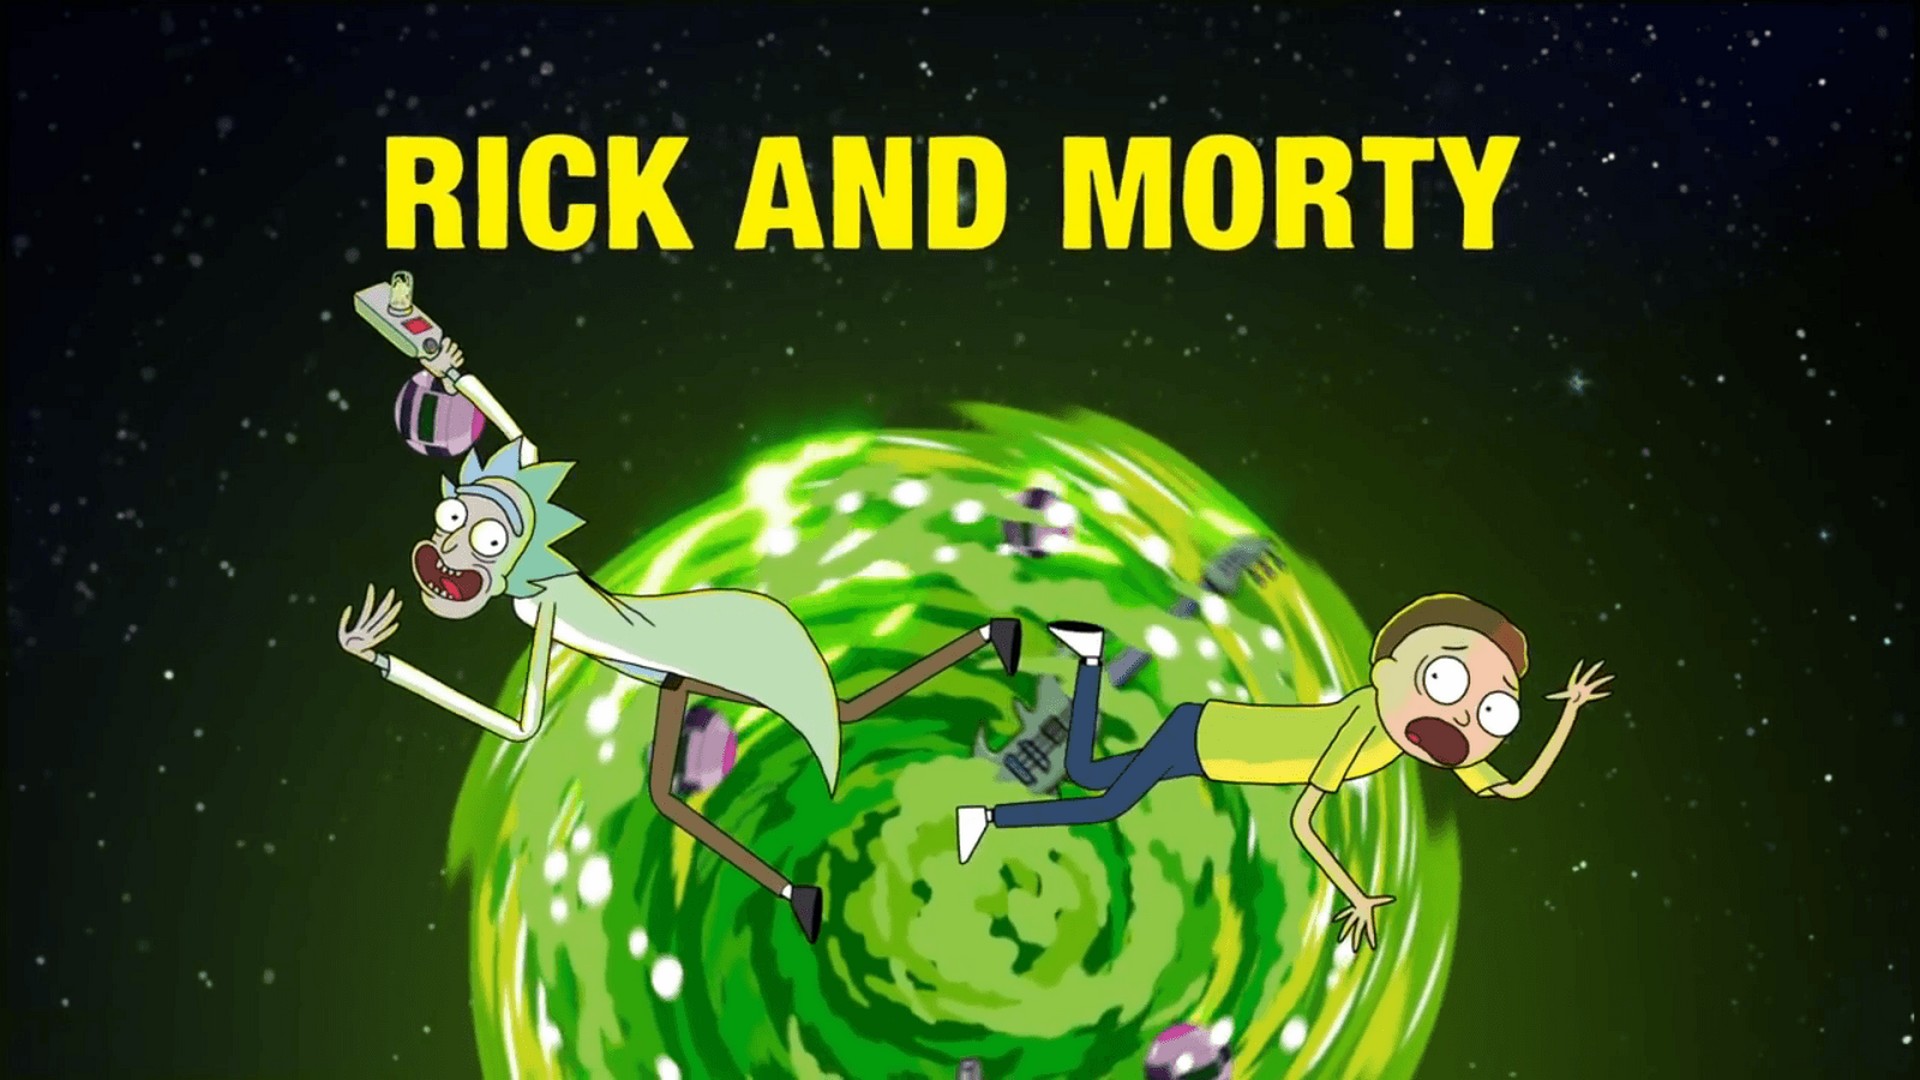 Computer Wallpapers Rick n Morty with resolution 1920X1080 pixel. You can use this wallpaper as background for your desktop Computer Screensavers, Android or iPhone smartphones